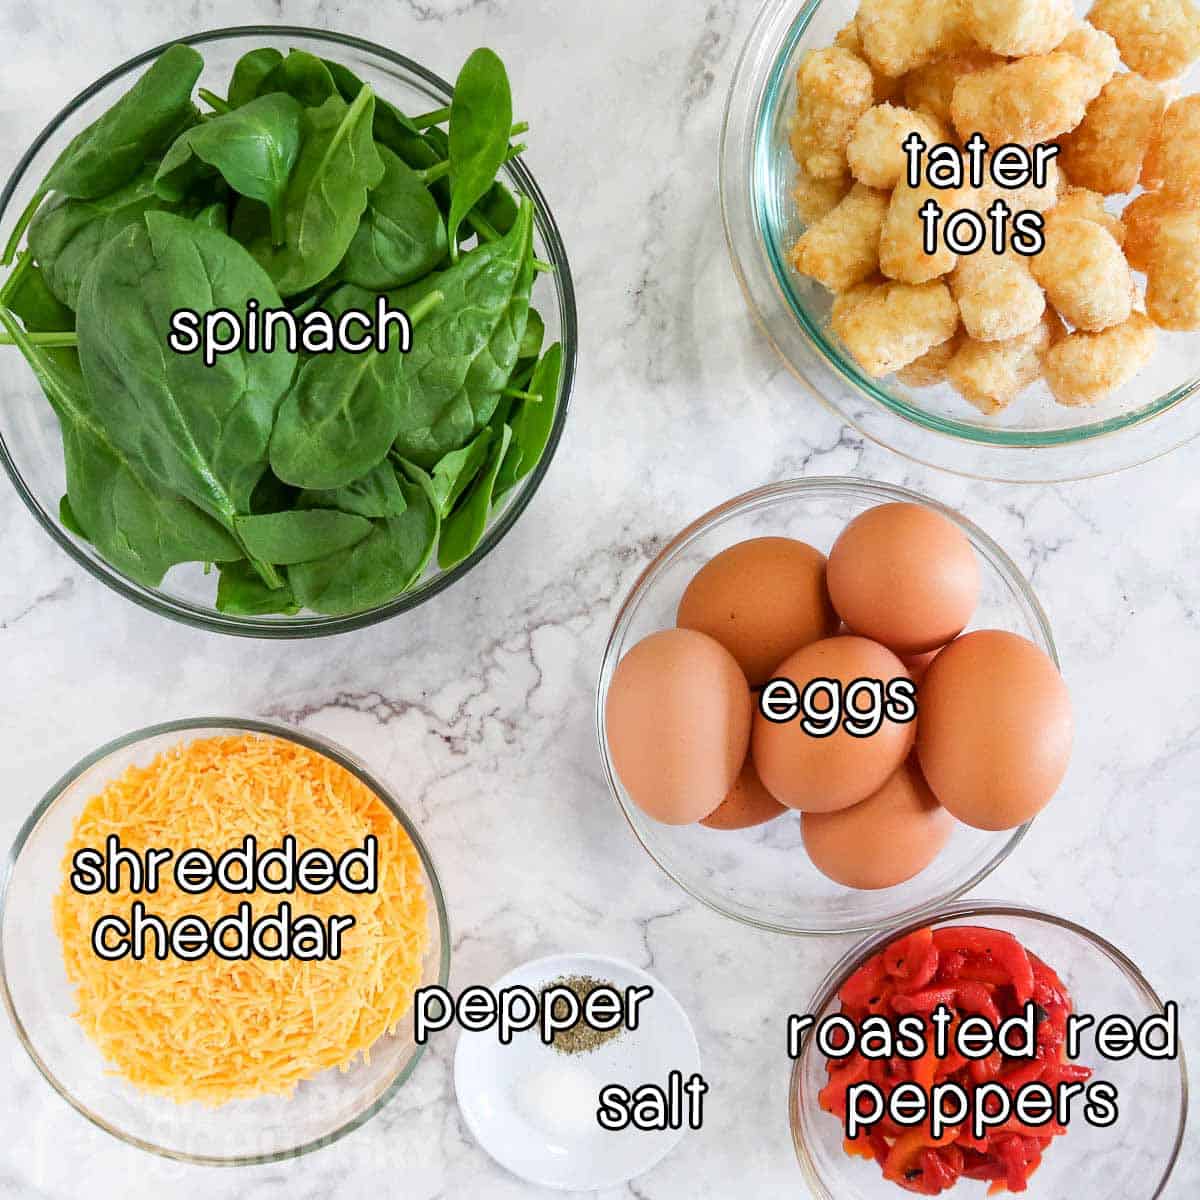 Overhead shot of ingredients - spinach, tater tots, eggs, shredded cheddar, roasted red pepper, pepper, and salt.